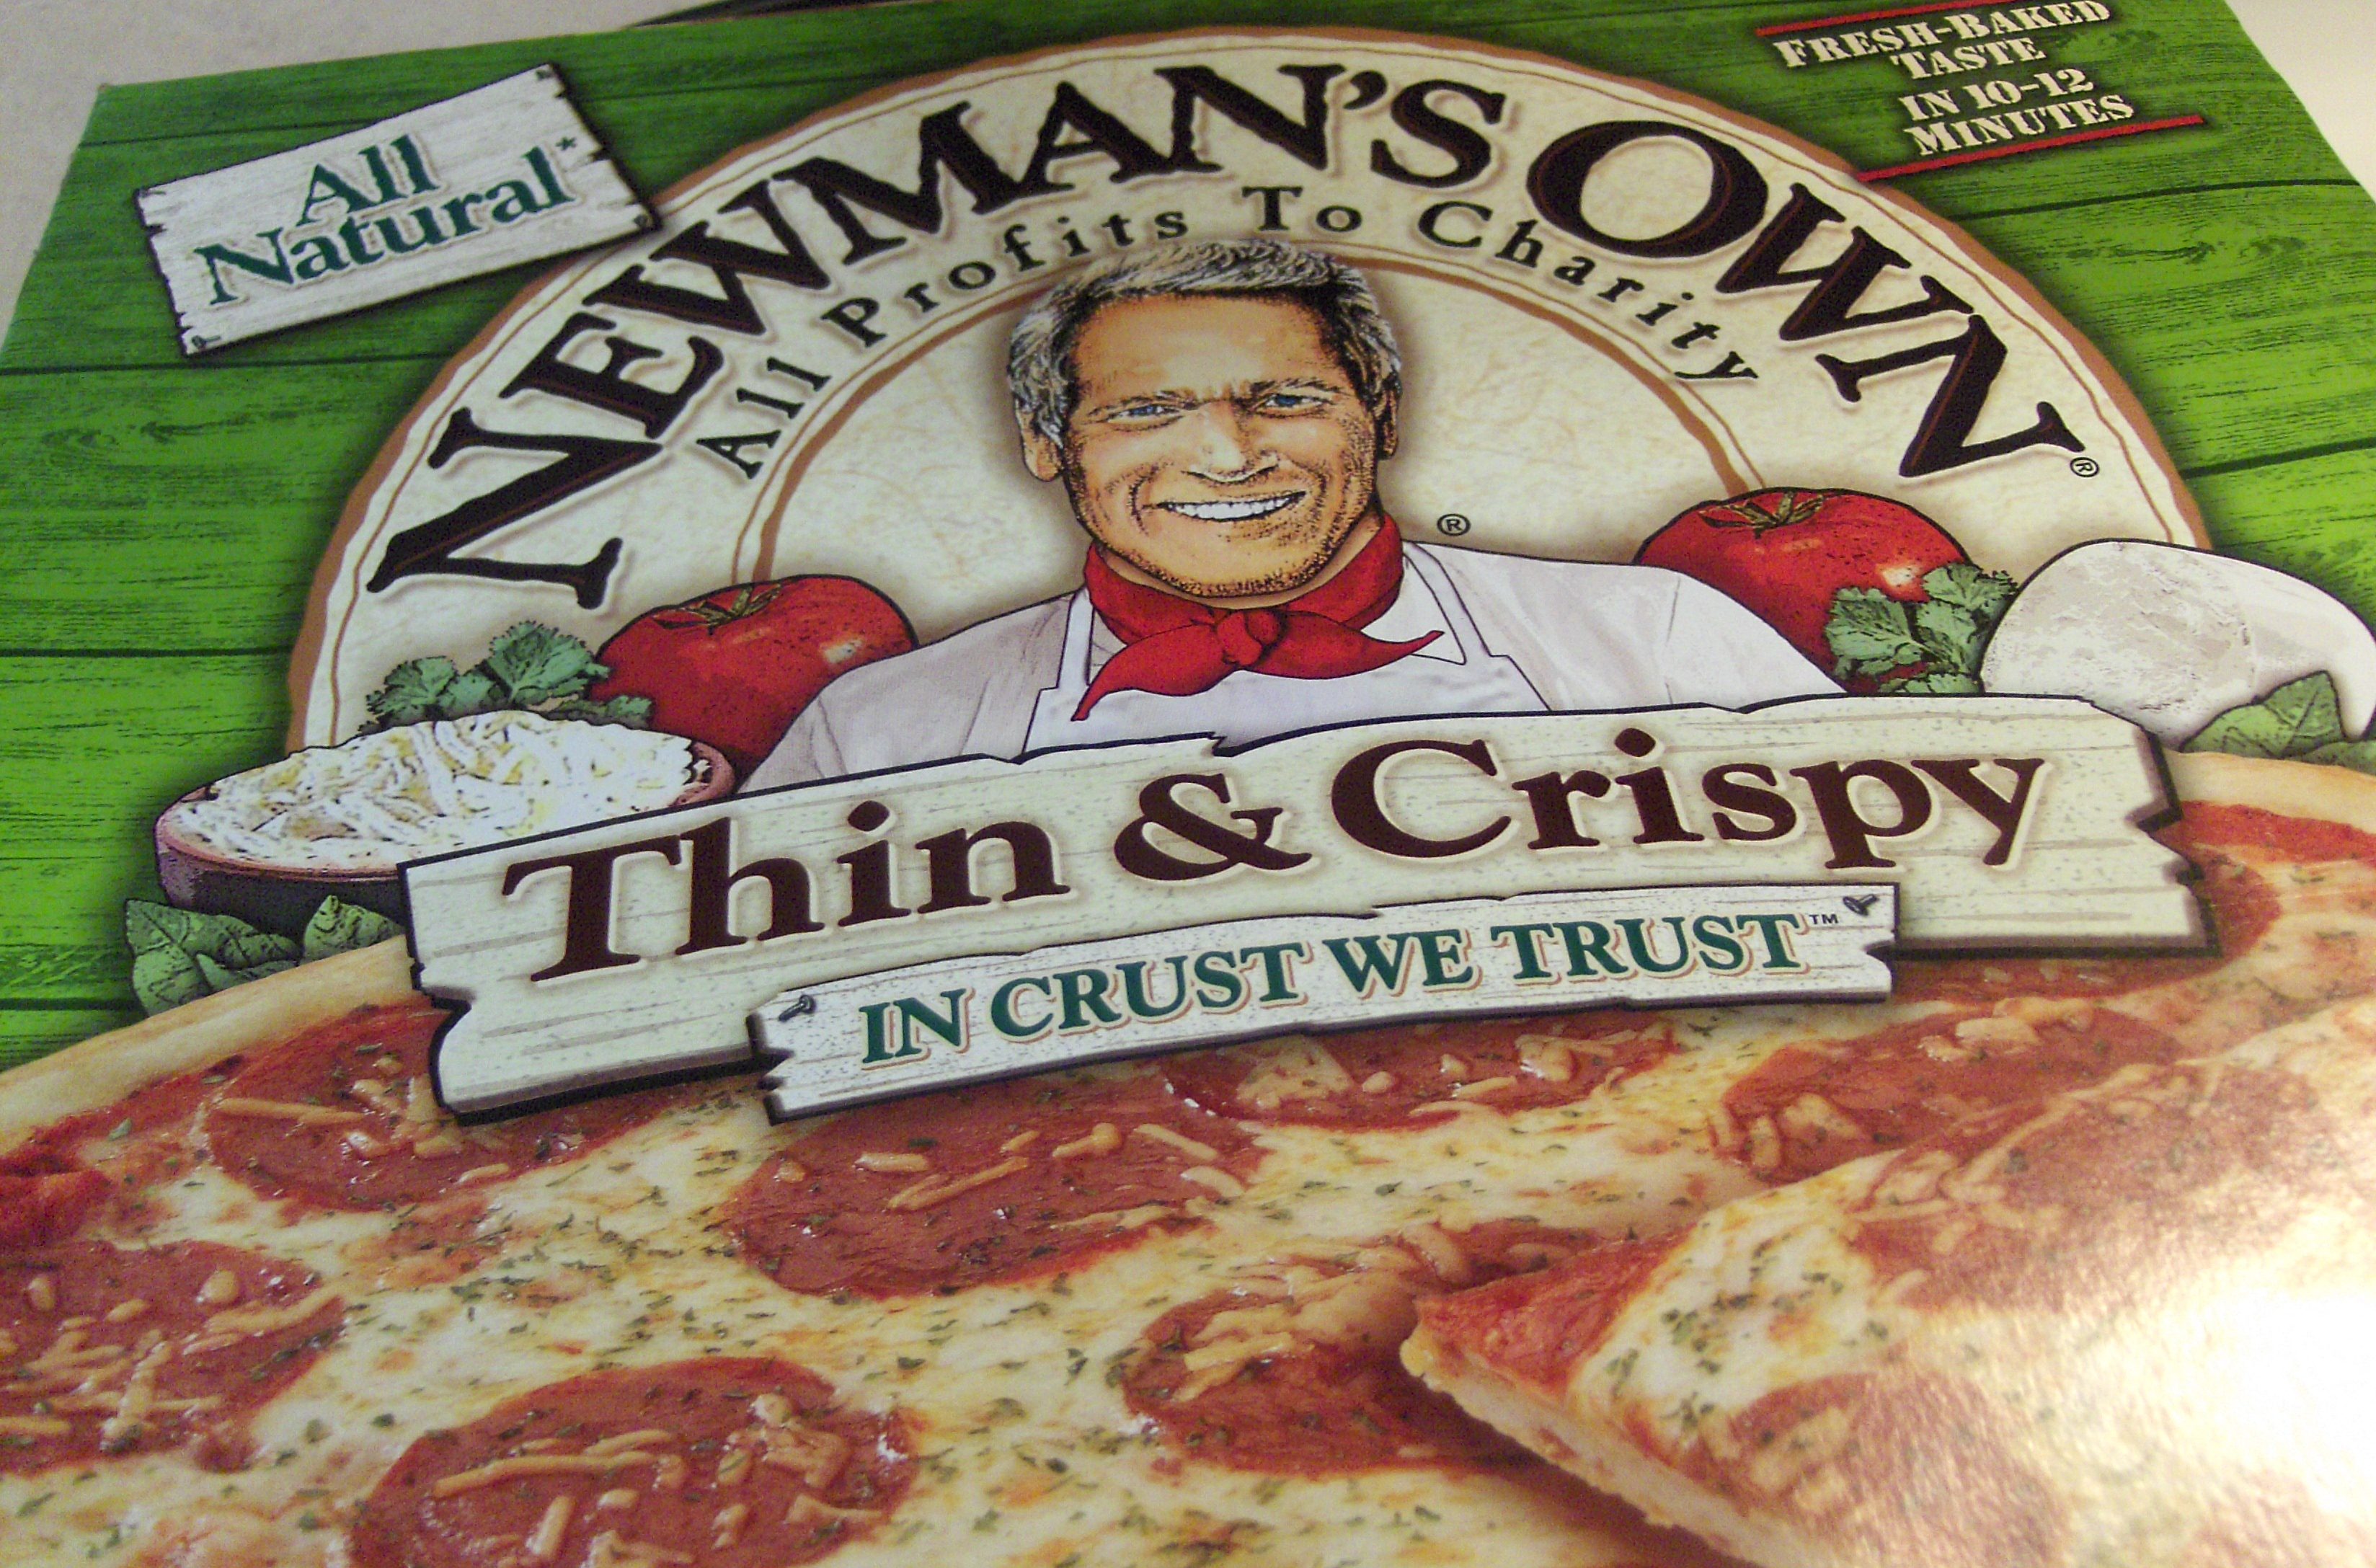 Newman’s Own Thin & Crispy Pizza Only $3.98!